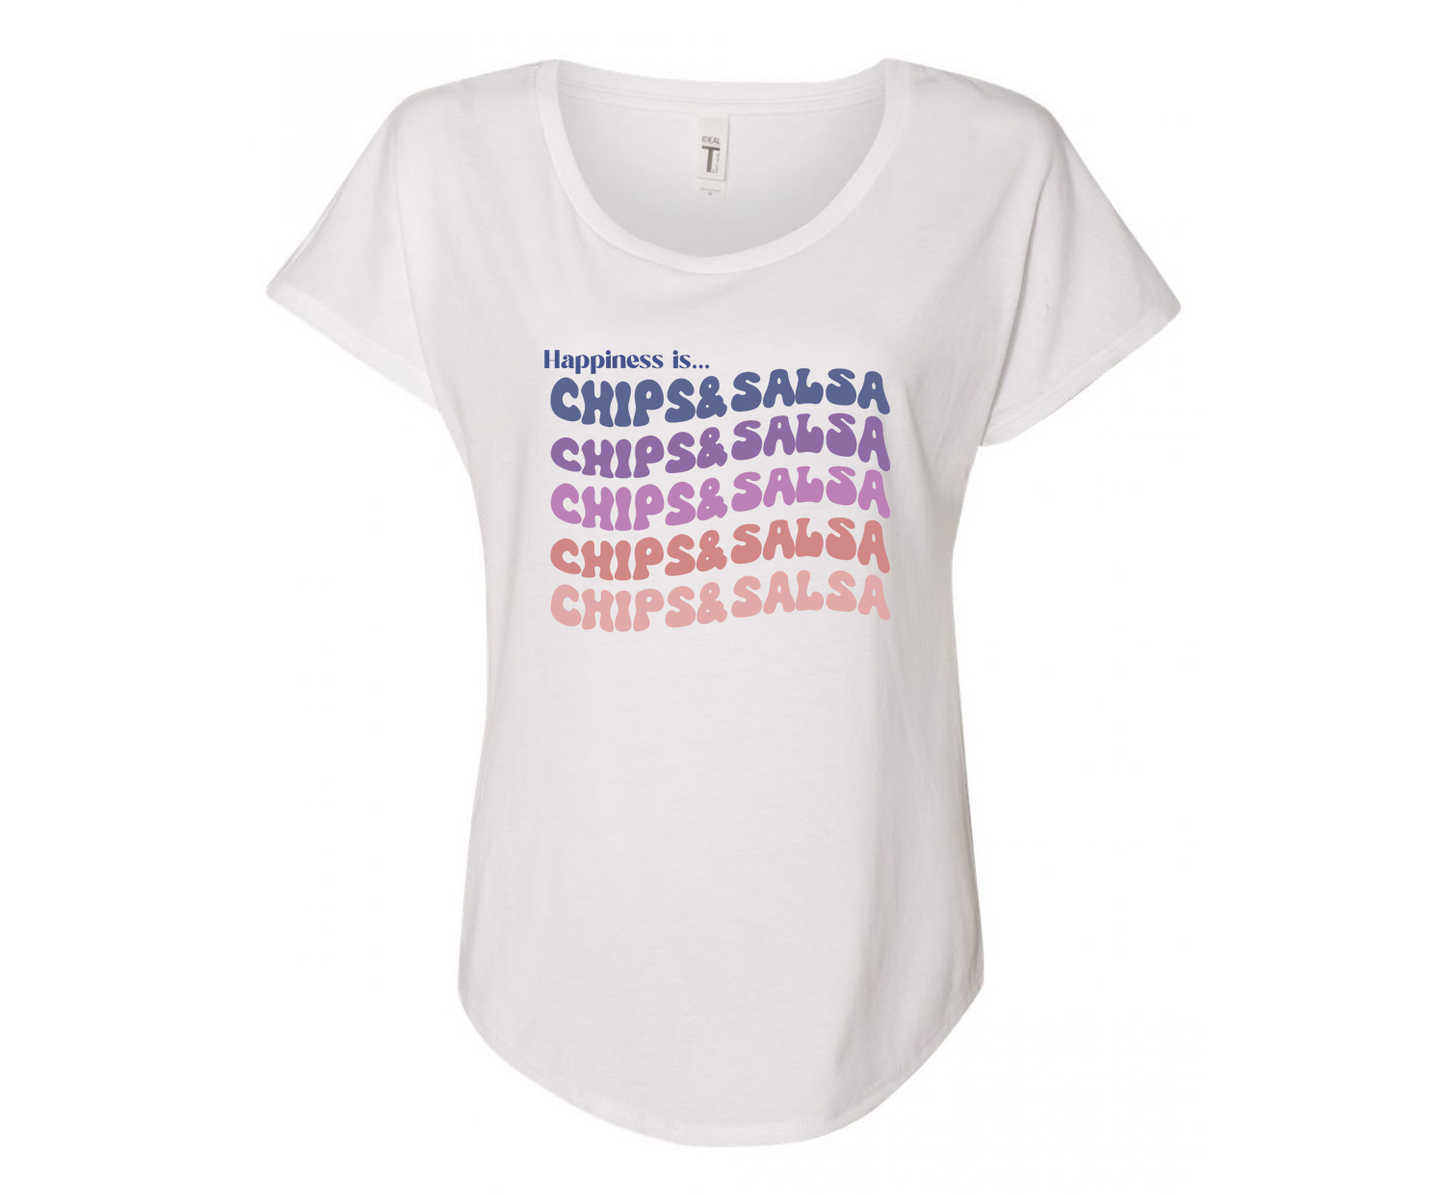 Happiness is Chips & Salsa Ladies Tee Shirt - In White & Grey